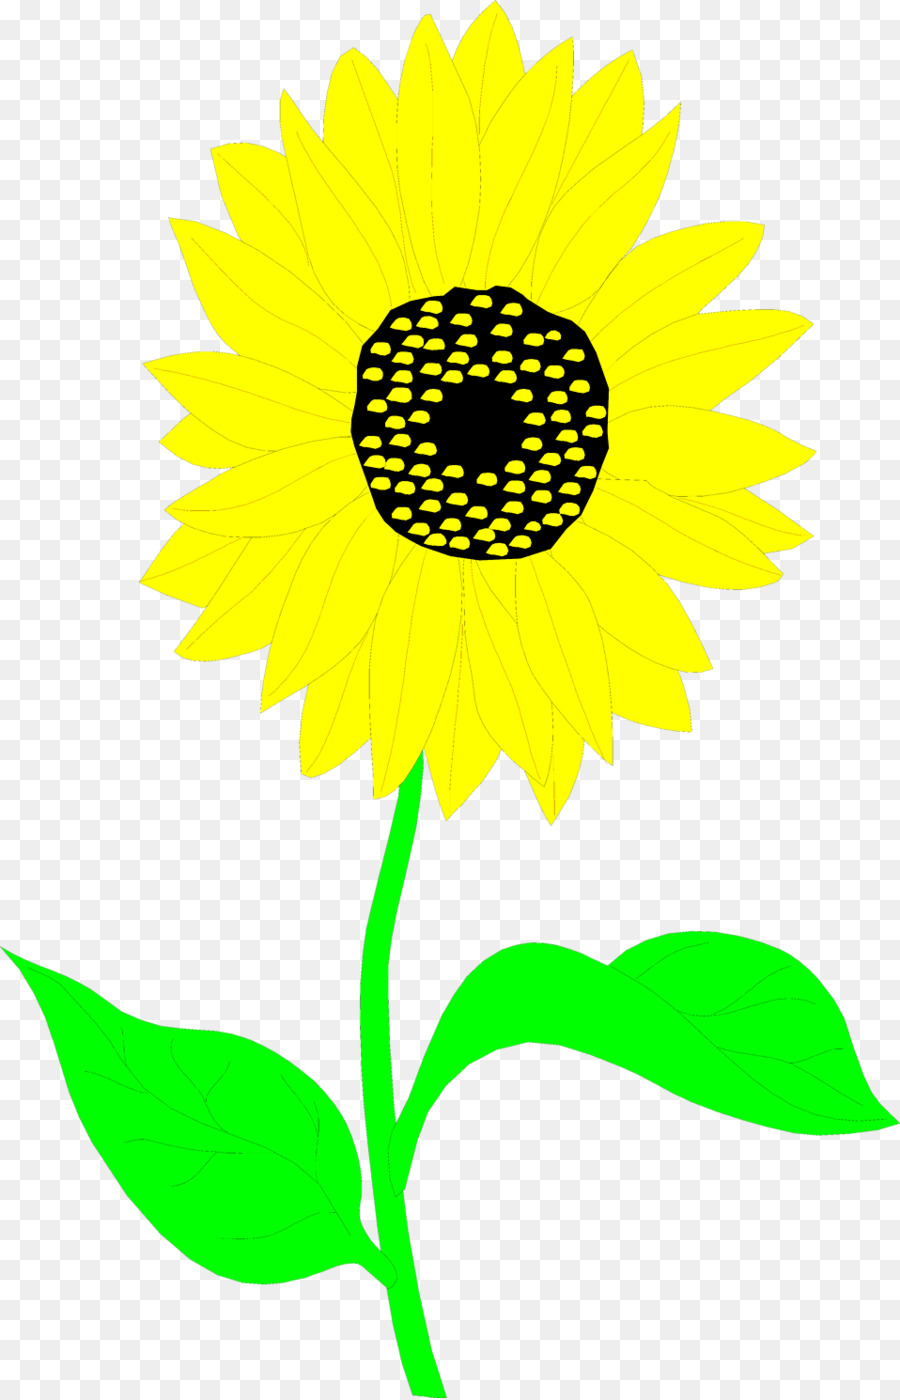 Common sunflower Drawing Clip art - sunflowers png download - 958*1488 - Free Transparent Common Sunflower png Download.